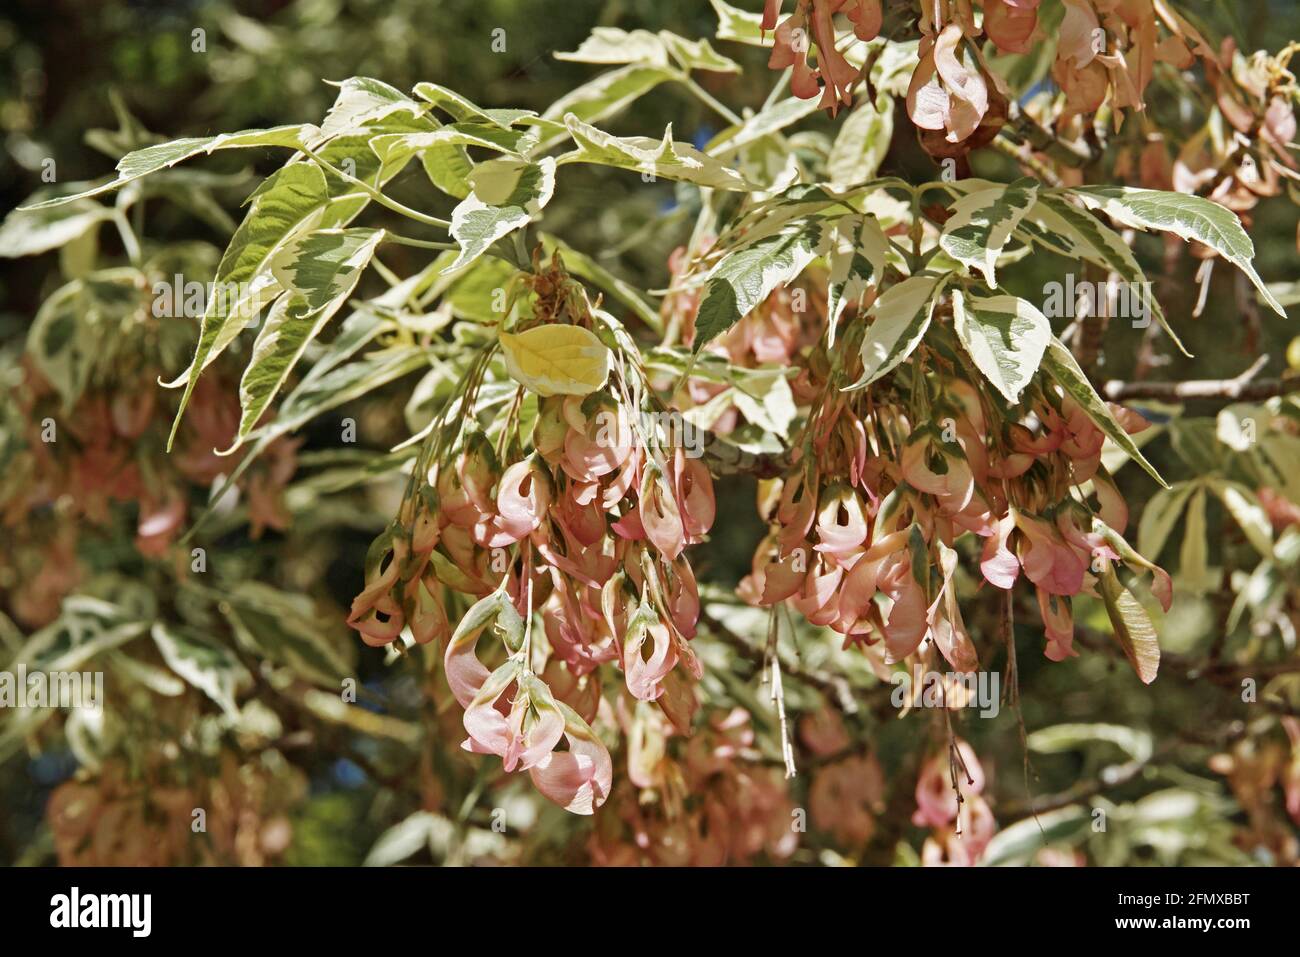 detail of a branch of variegated box elder with leaves and samaras, Acer negundo, Aceraceae Stock Photo